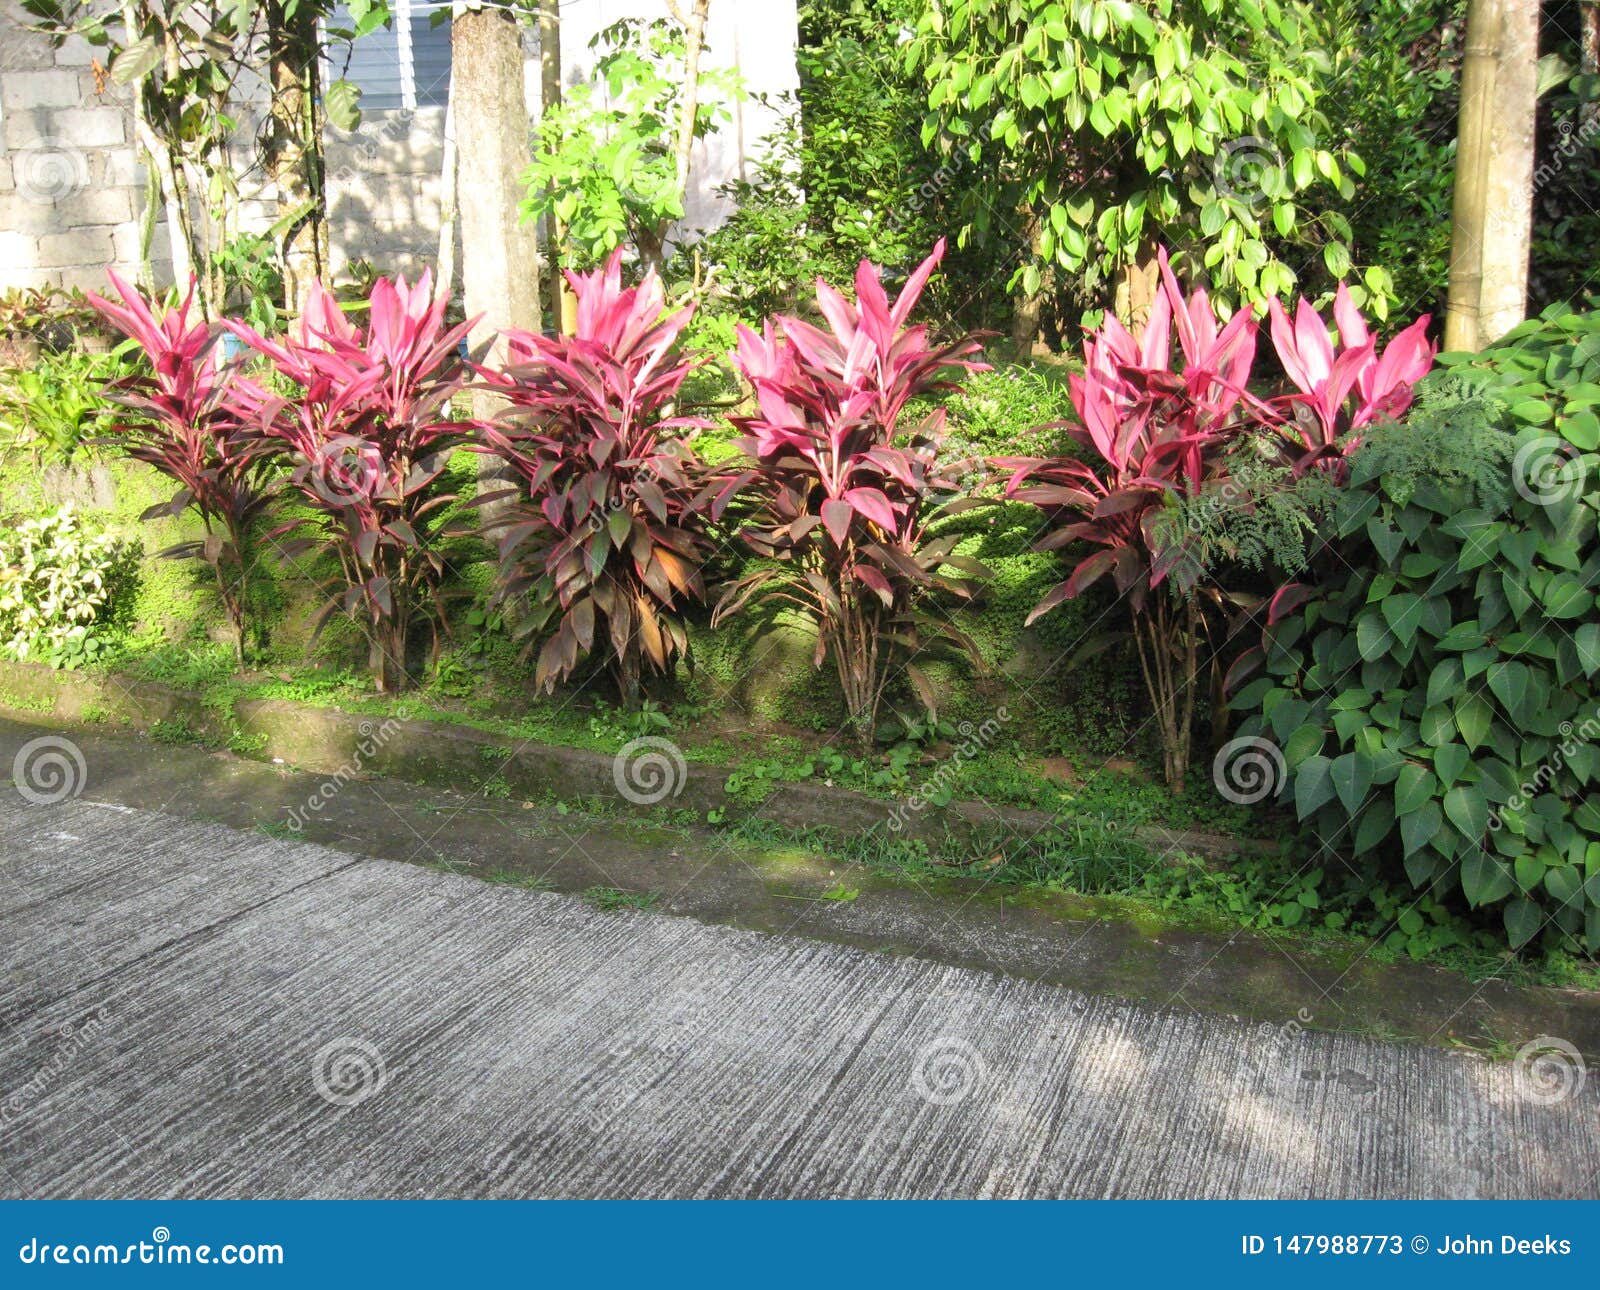 colourful plants along a street in san isidro, lipa city, philippines